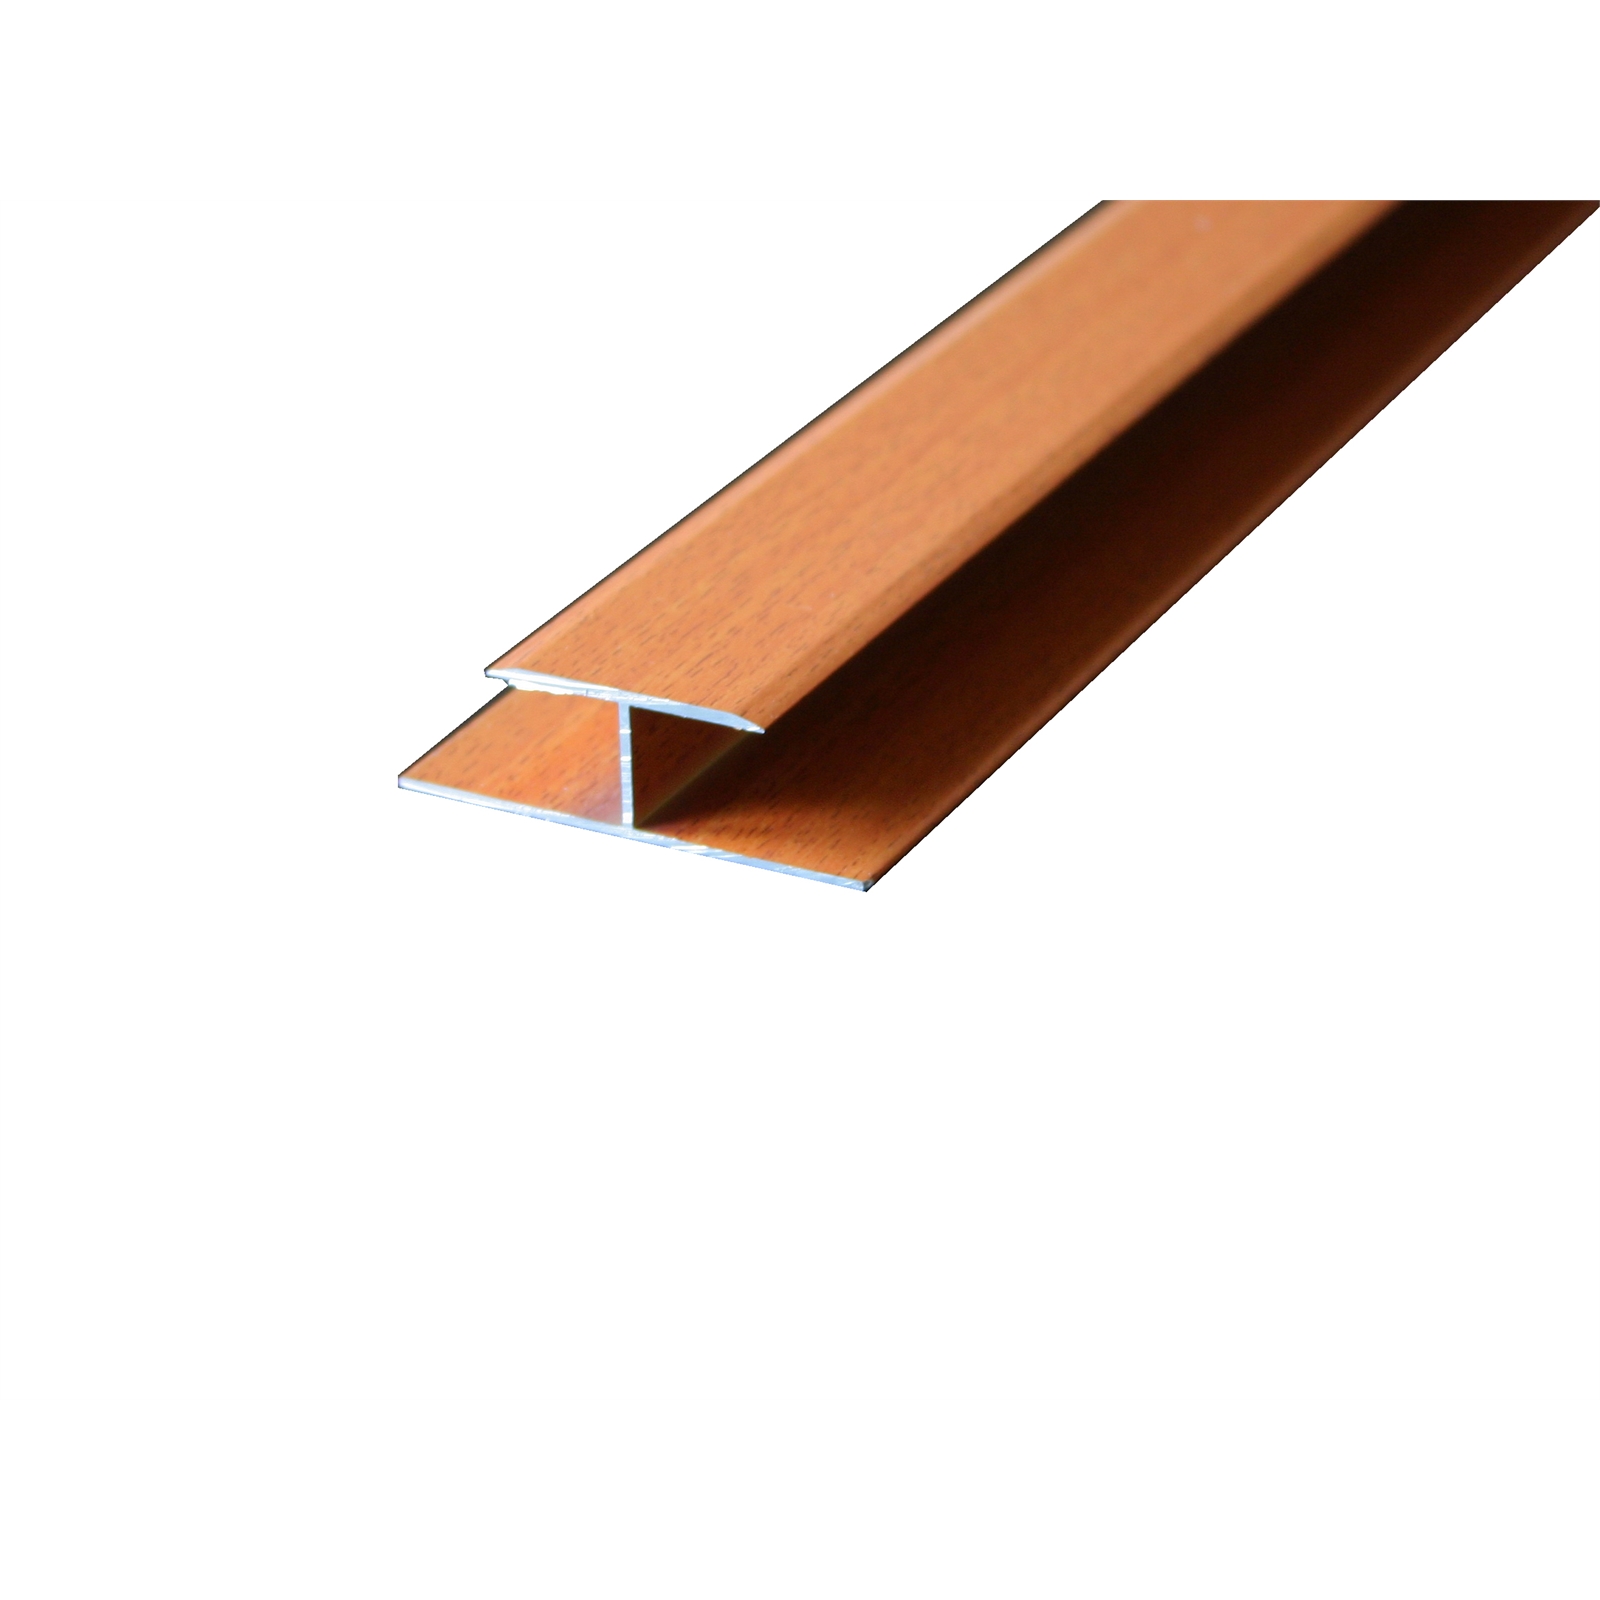 Roberts 1.65m x 8mm Mid-Light Expansion Joint Timbertone Floating Floor Trim